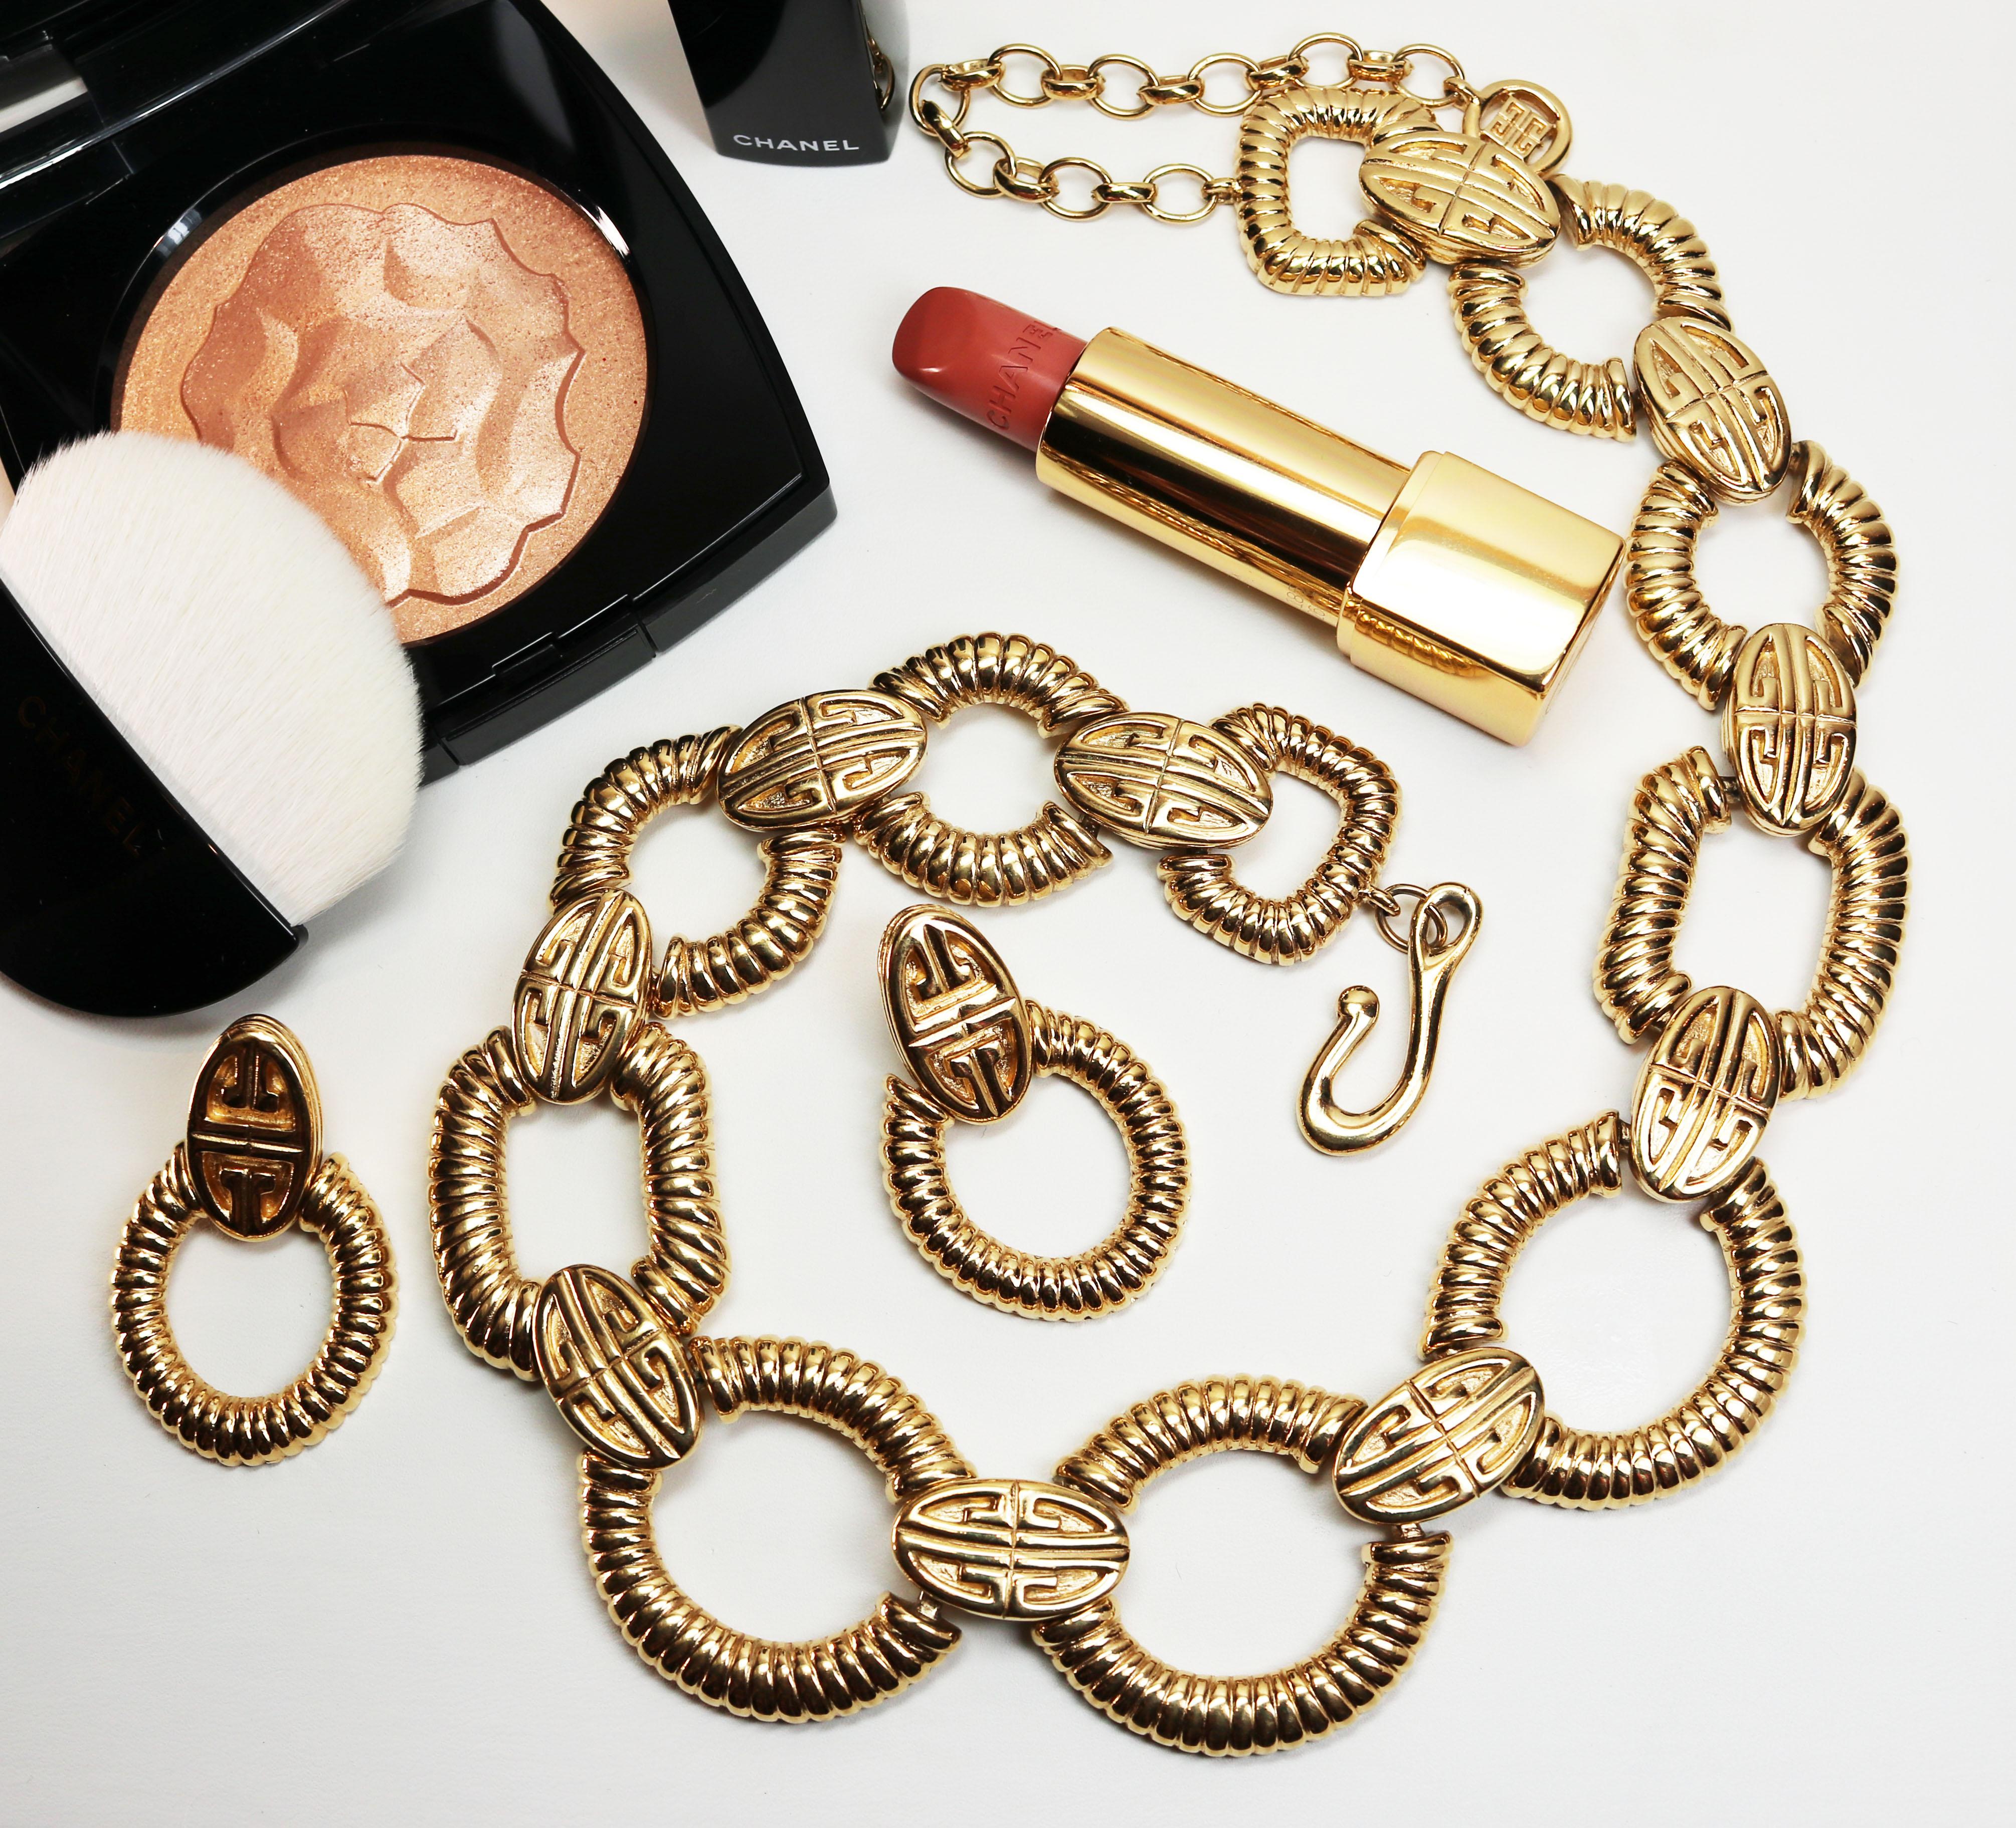 These pieces feature the iconic Givenchy logo on gold plated, oval shaped links with articulating, ribbed hoops that form a very unique doorknocker style. The earrings are signed GIVENCHY on an oval cartouche on the reverse, measure 1.75